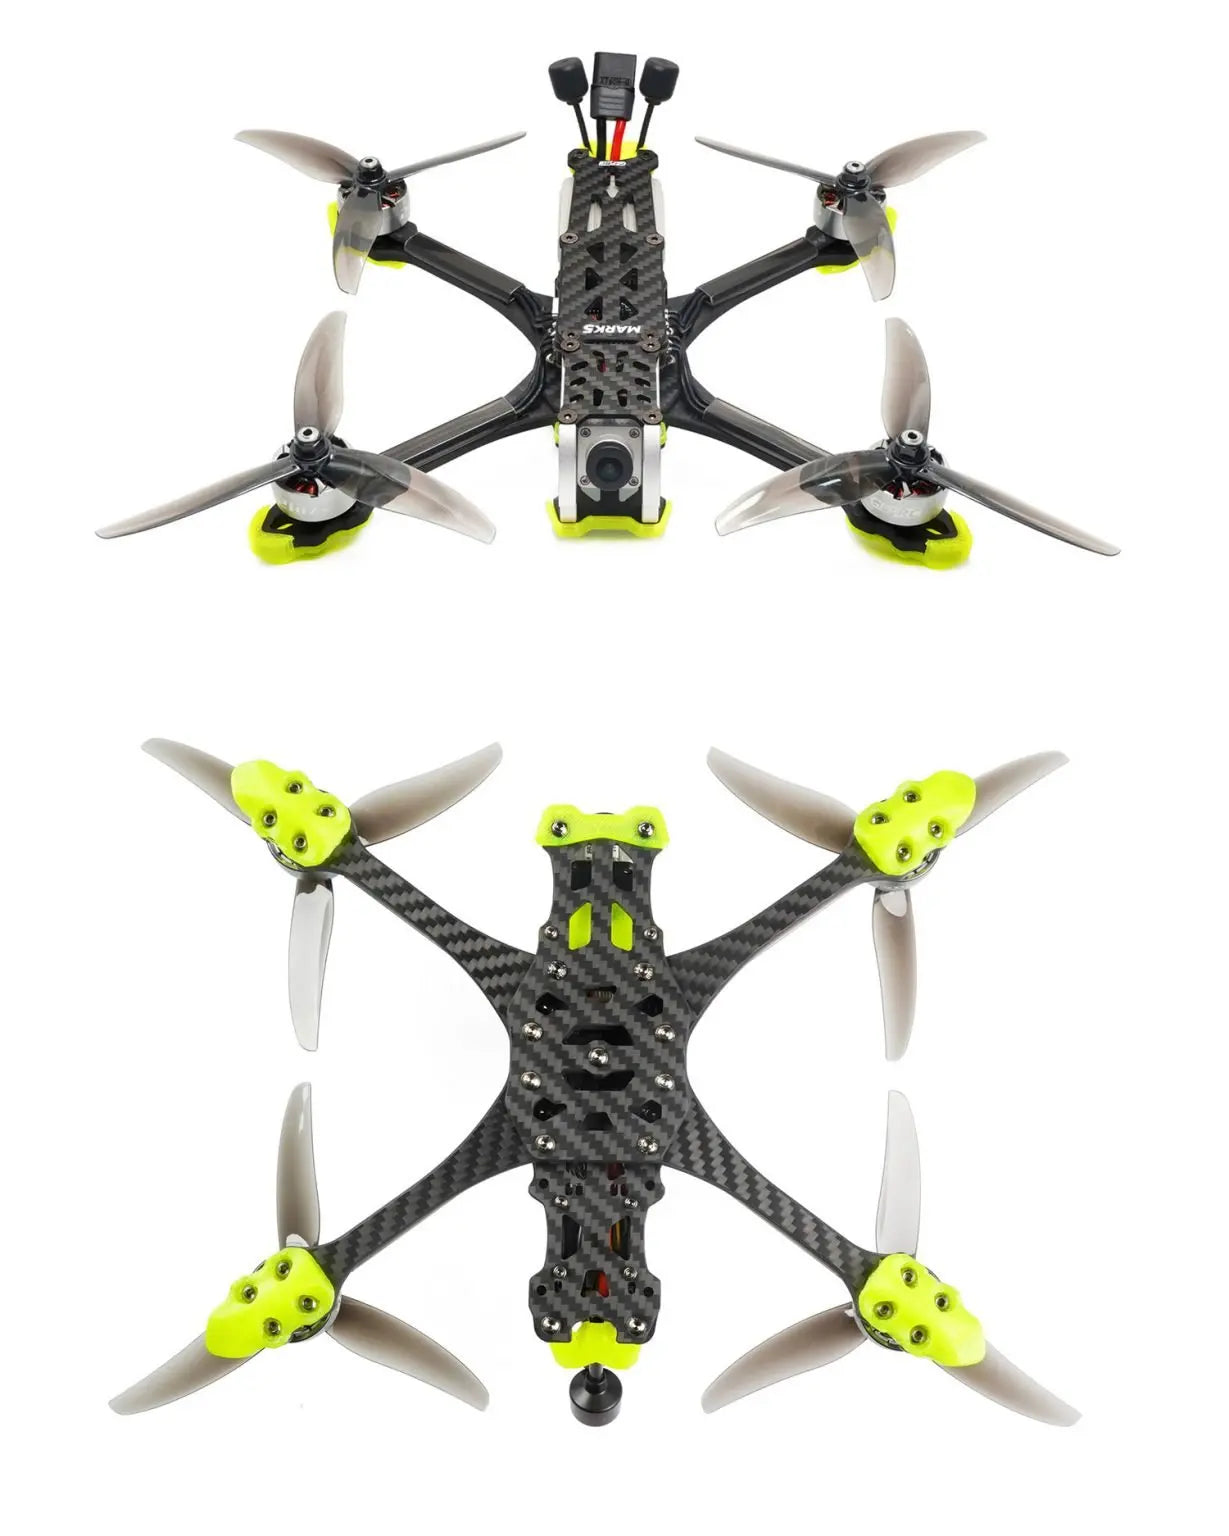 GEPRC MARK5 FPV Drone, GEPRC's MARK5 Analog Quadcopter weighs 386.0g (